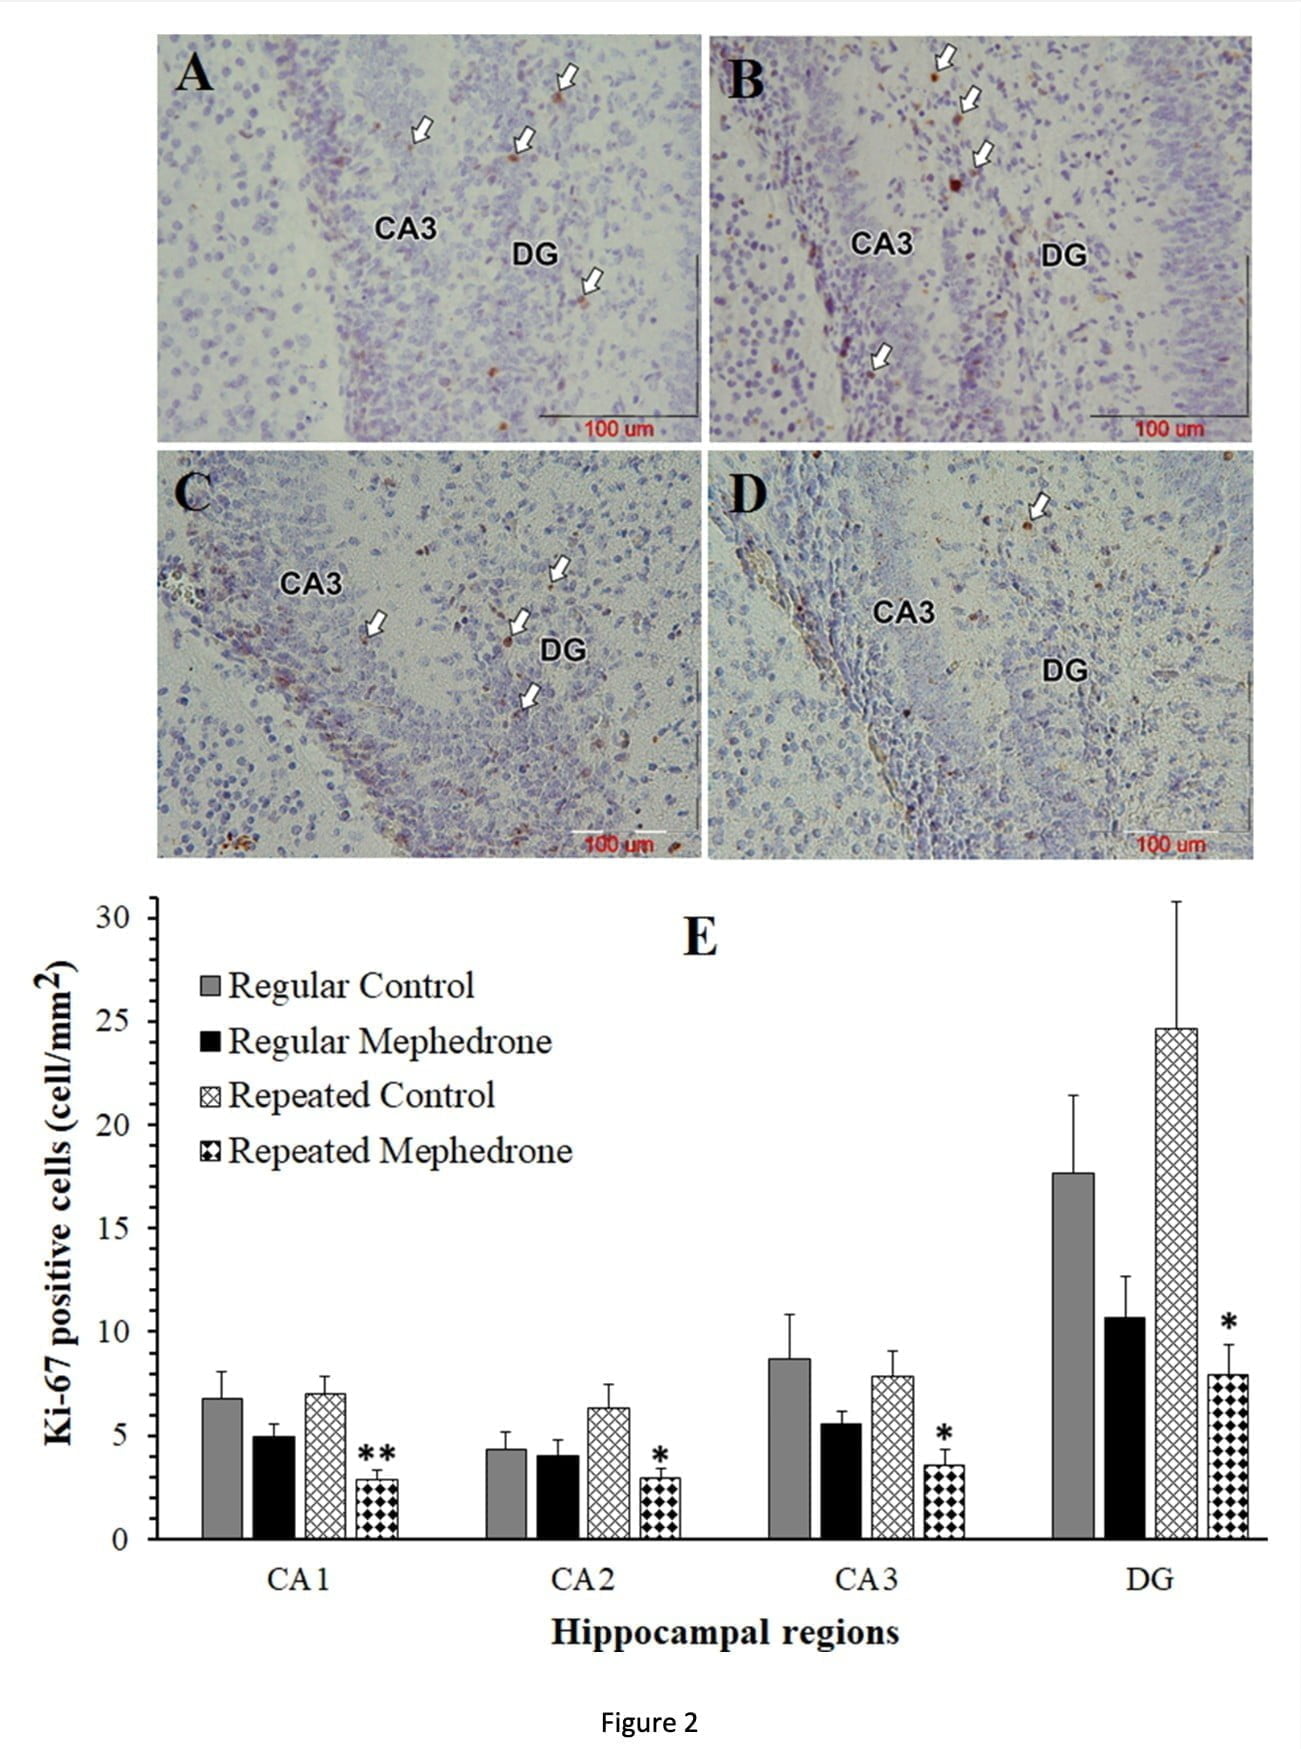 <strong>Neurotoxic effects of mephedrone in an embryo cause stillbirth or hippocampal death</strong>